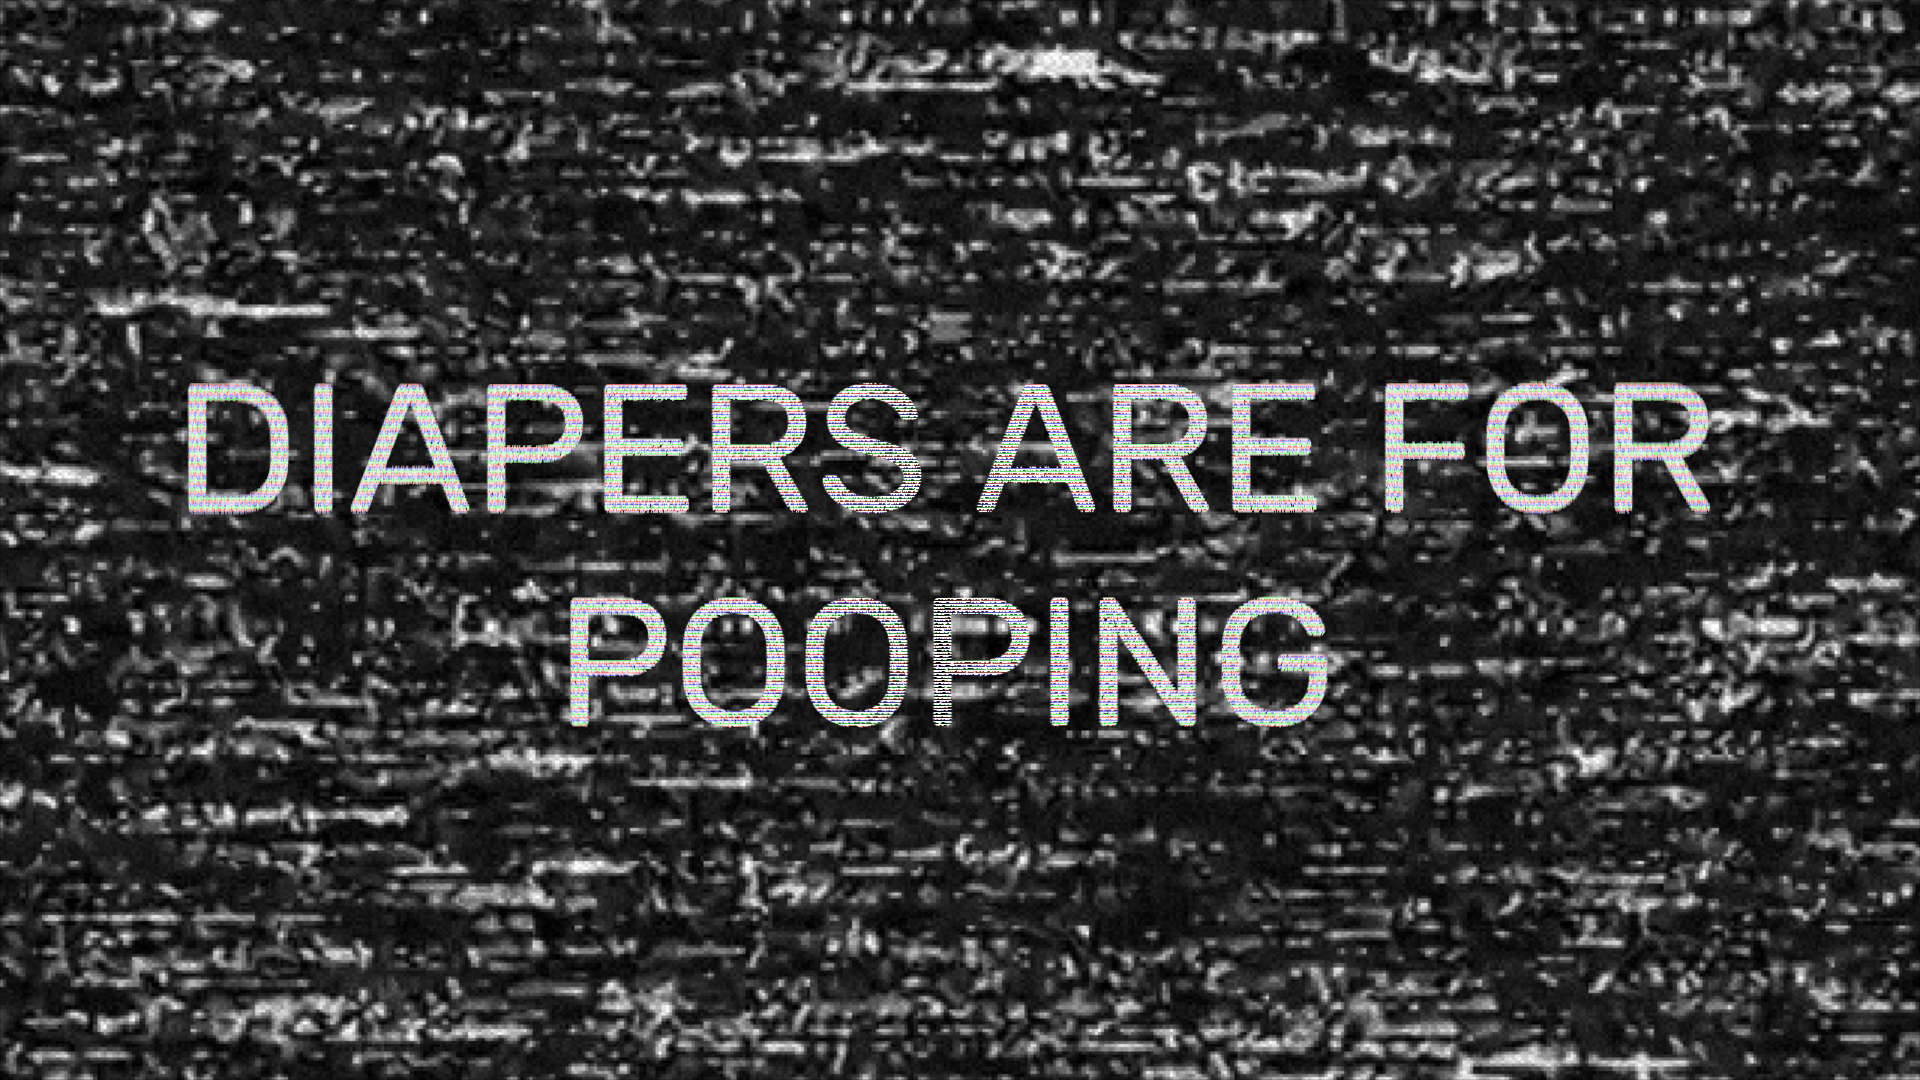 Diapers are for pooping - extended